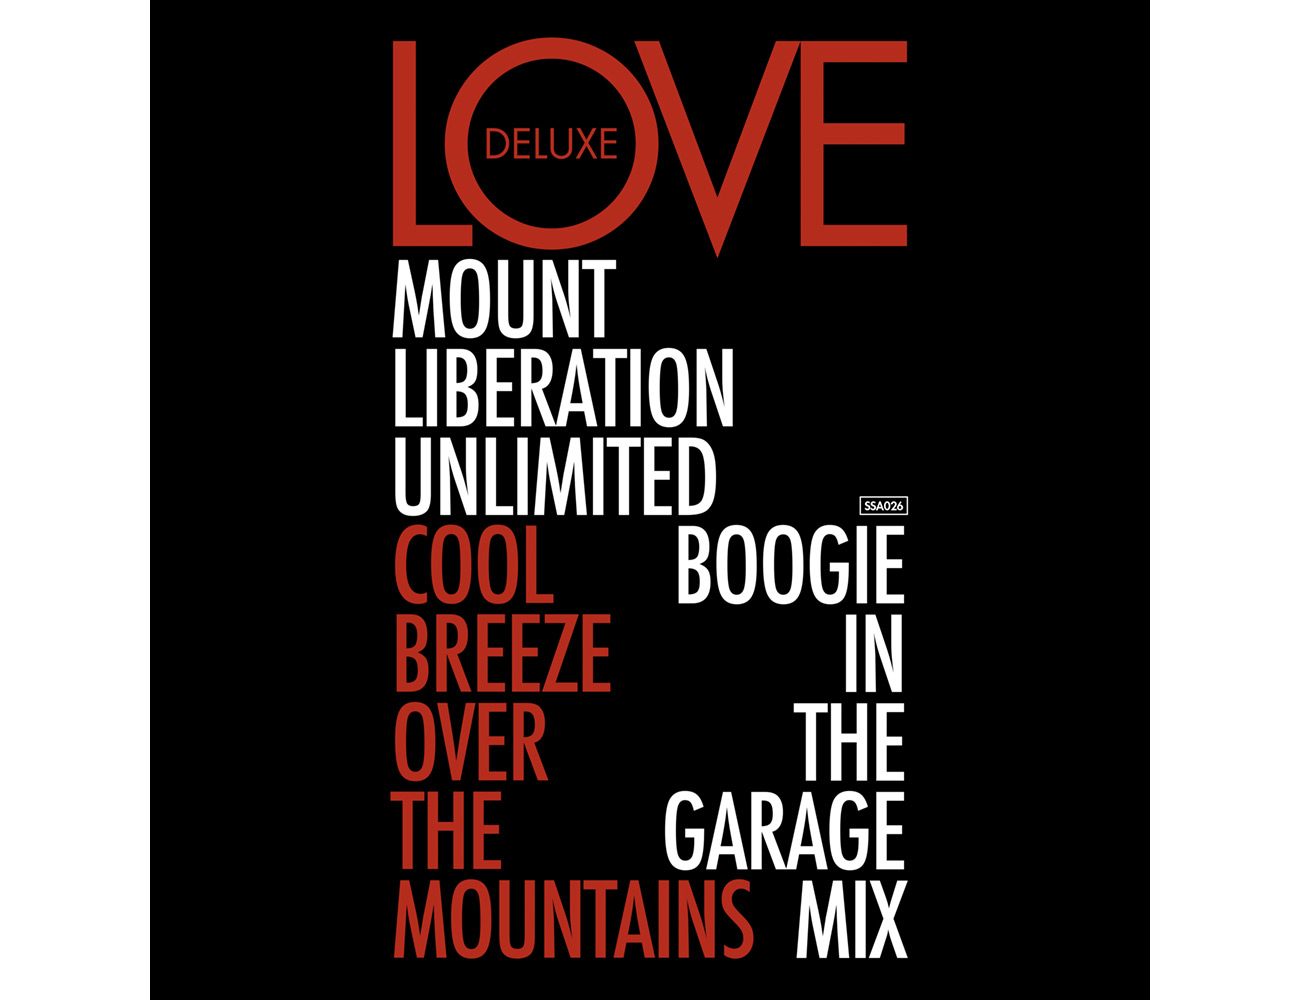 lost-art-chris-hopkins-design-love-deluxe-cool-breeze-over-the-mountains-remix-artwork